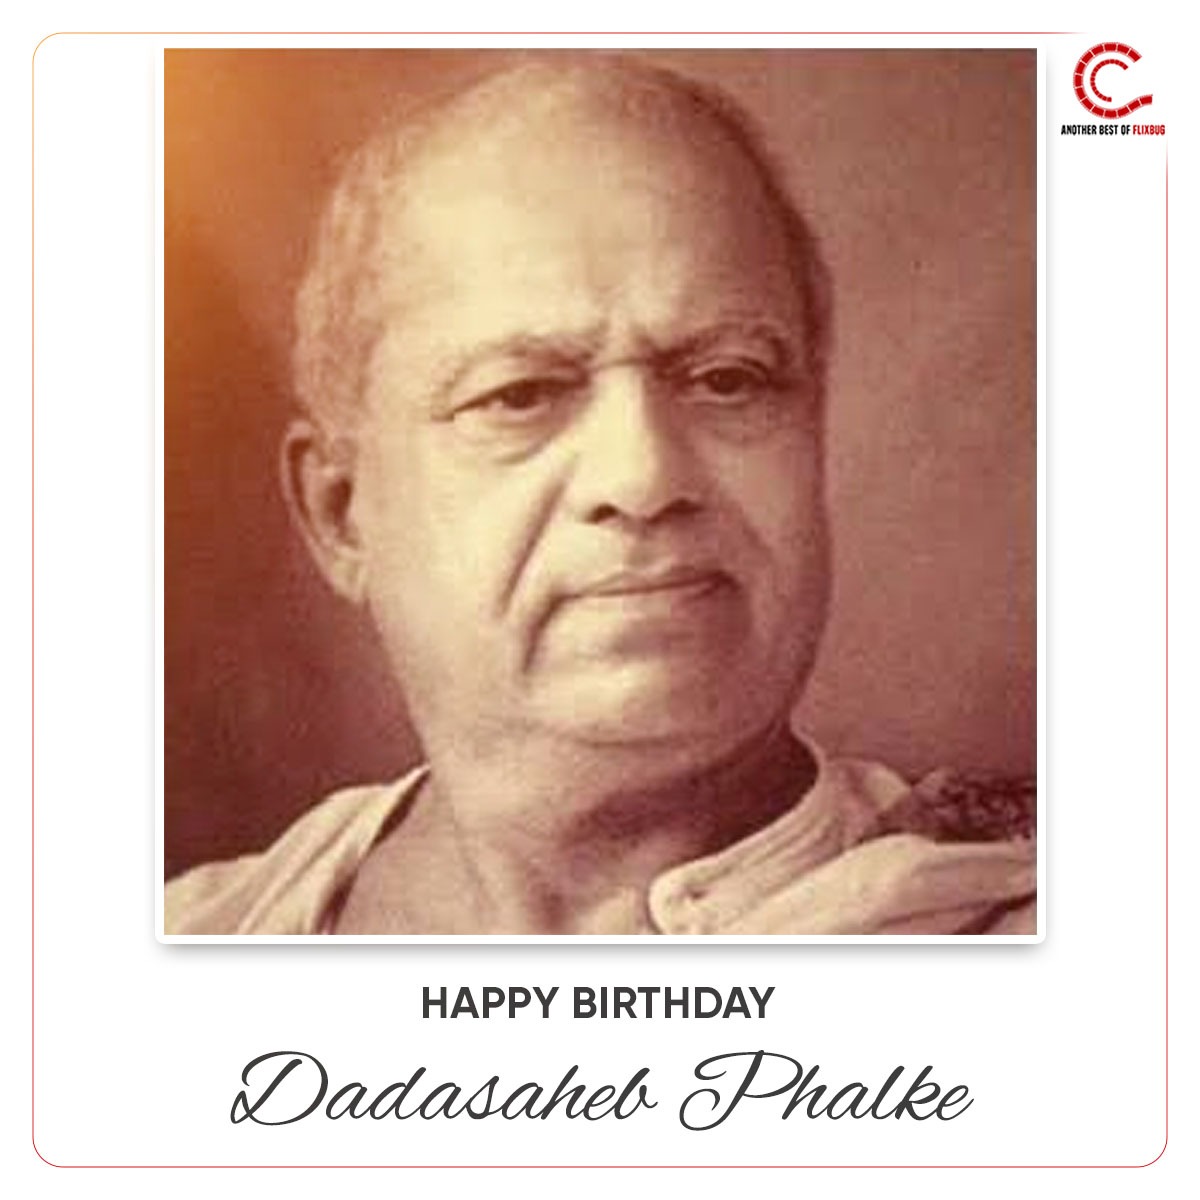 The father of Indian cinema - 'Dhundraj Gobind Phalke' was his real name though he is best known as 'Dada Saheb Phalke' - made India's first full-length movie in 1913 called 'Raja Harishchandra'.  #Ciinee tributes the legend on his Birth Anniversary. 

#DadaSahebPhalke #classic